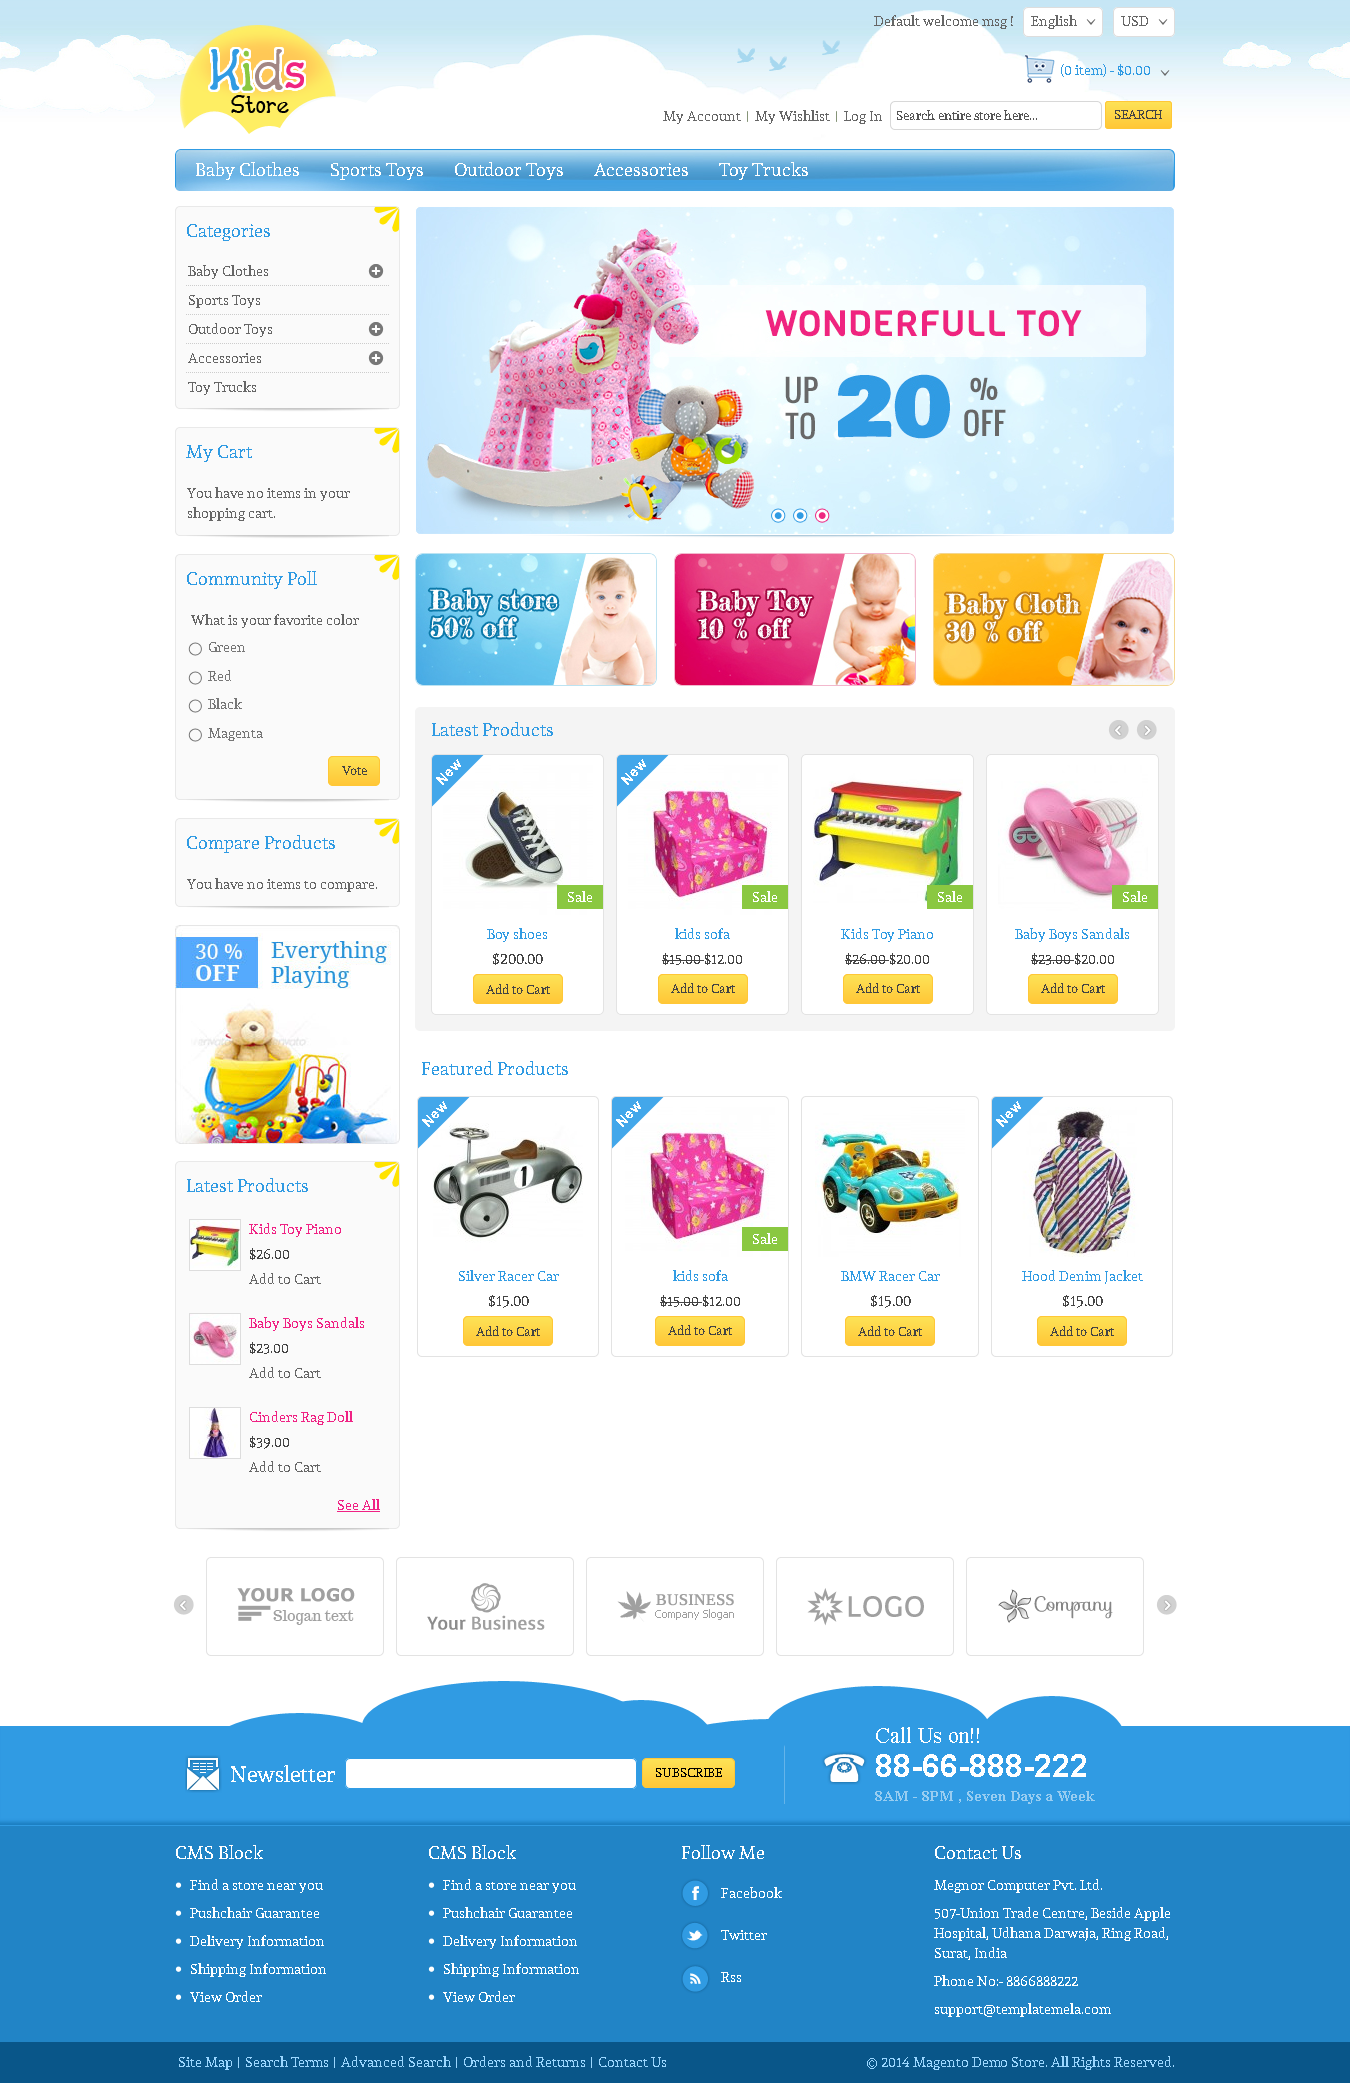 Top magento themes for kids store - Kids Store - Magento Responsive Template